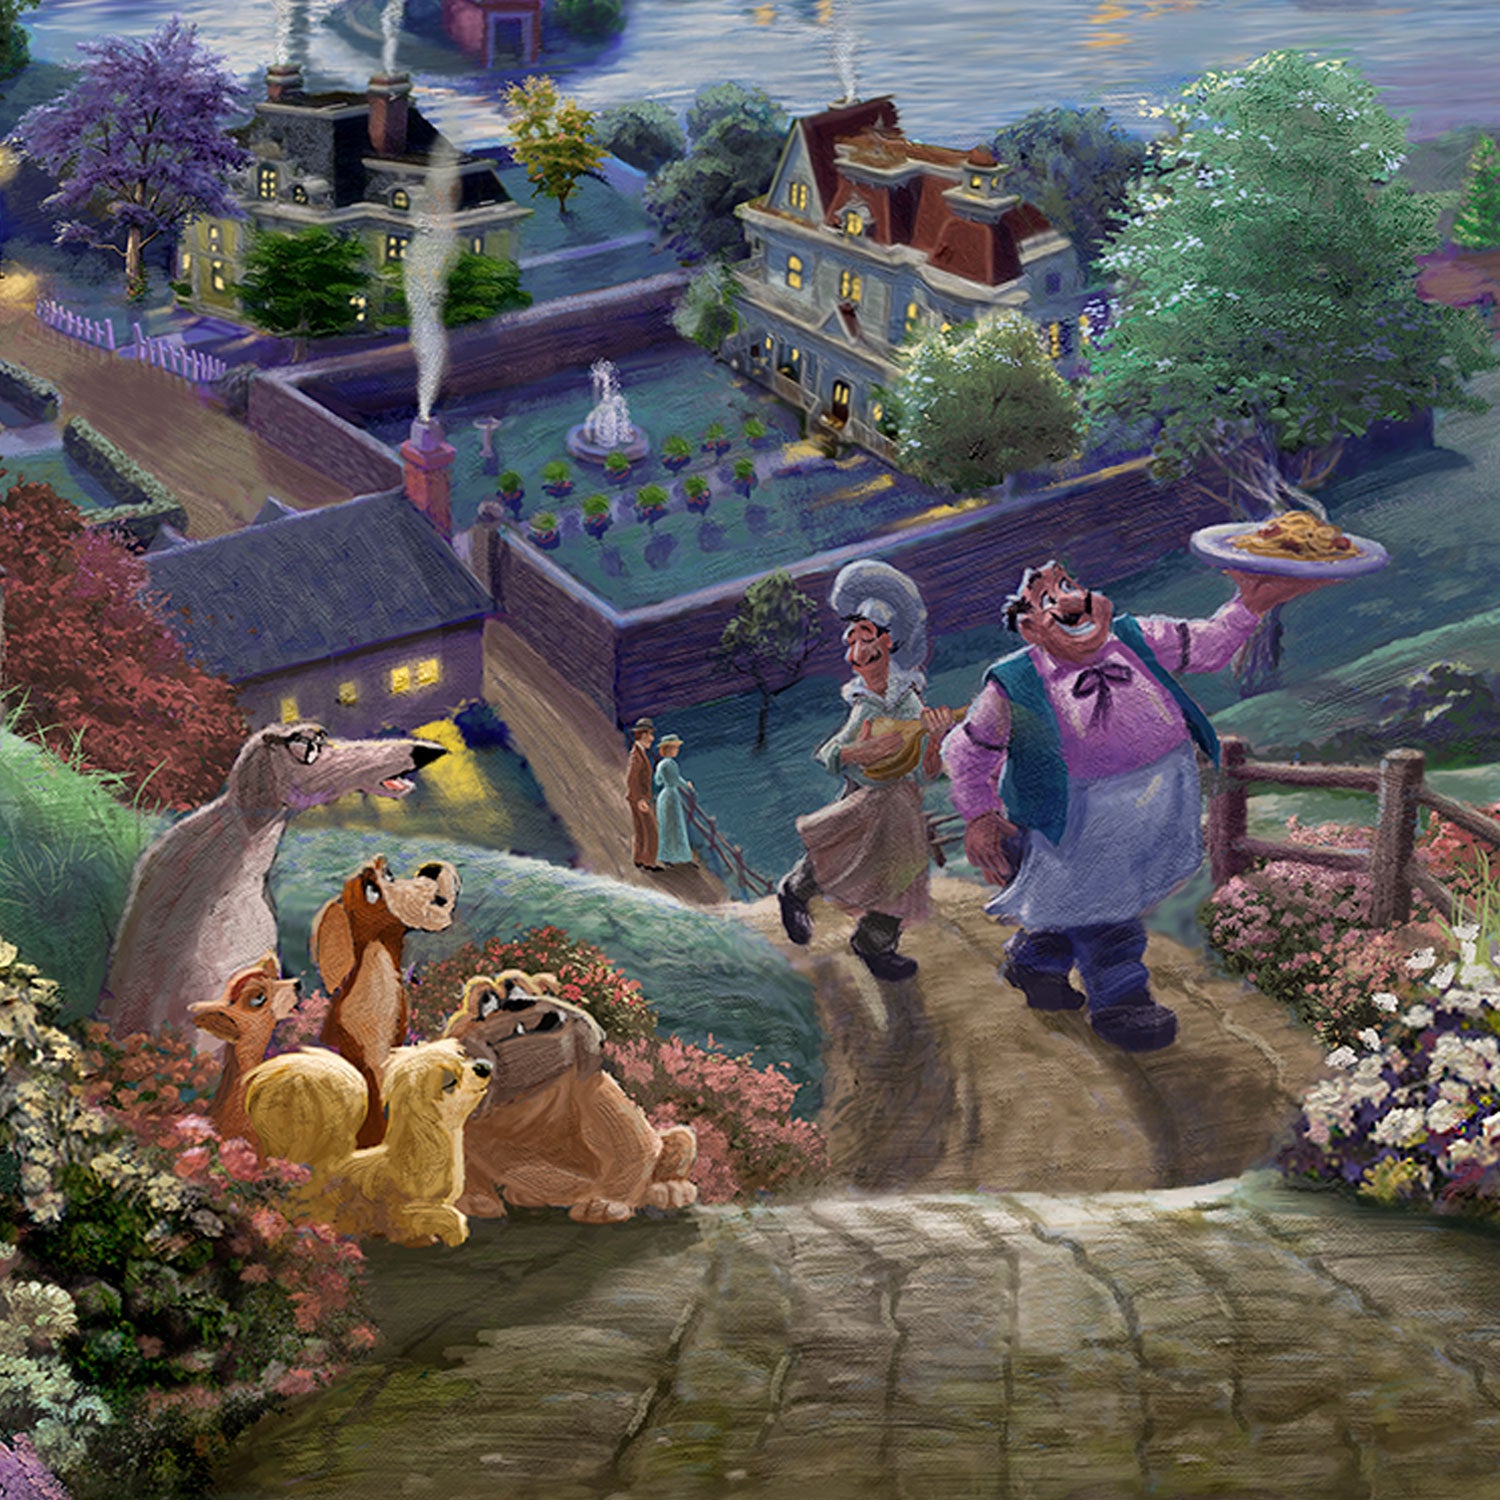 Tony and Joe head uphill towards Lady and the Tramp delivering a special meal. - closeup